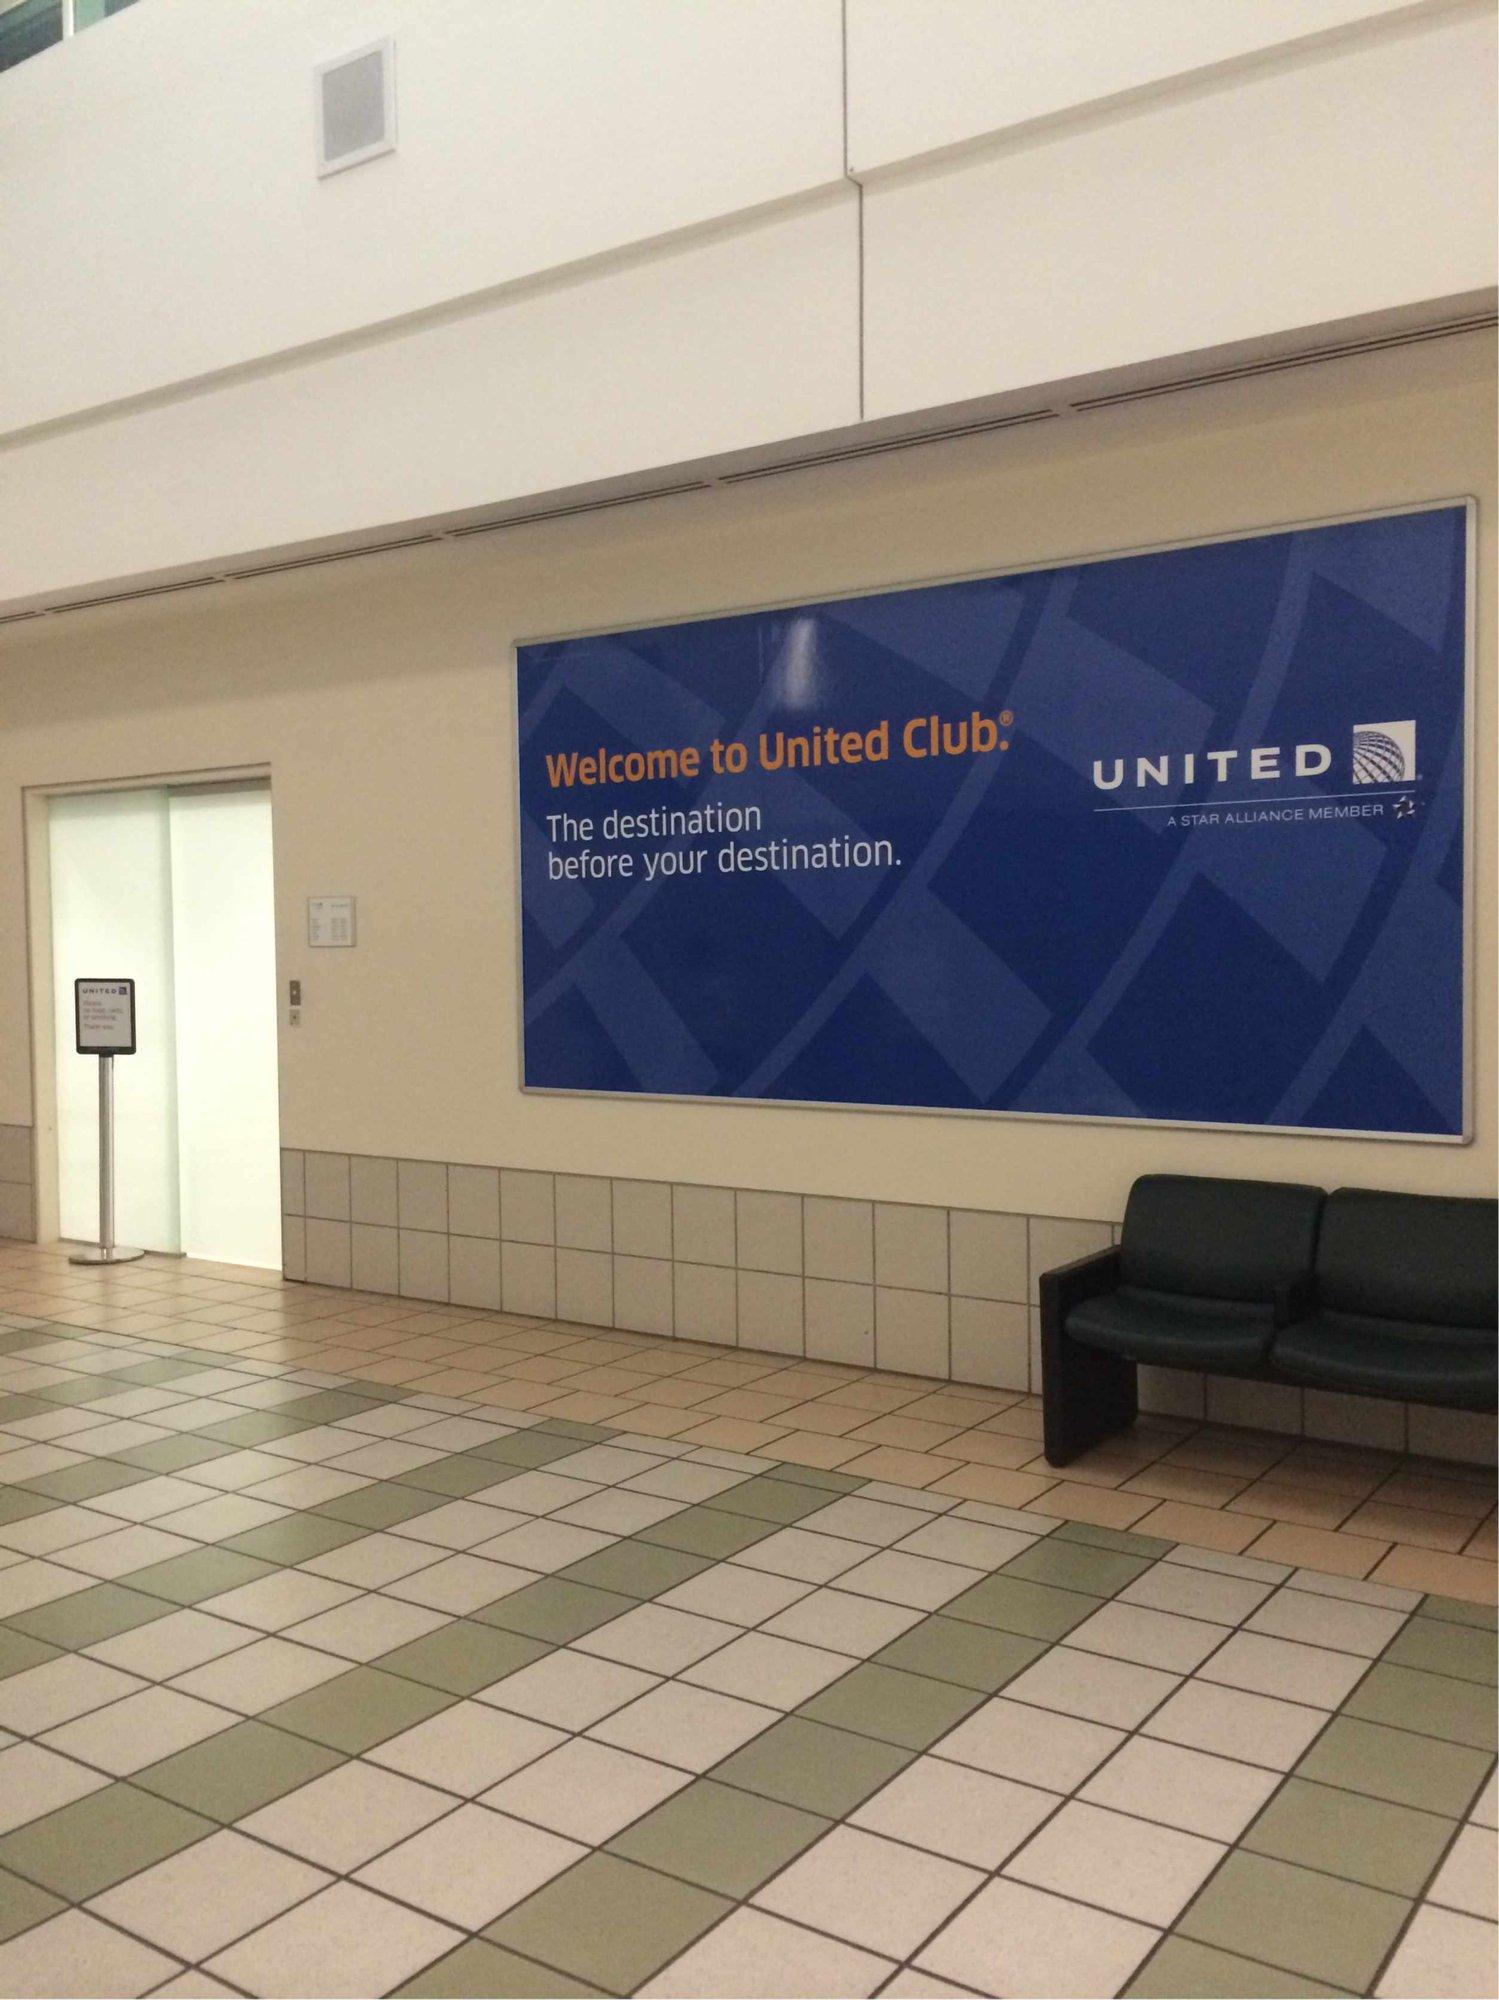 United Airlines United Club image 18 of 40